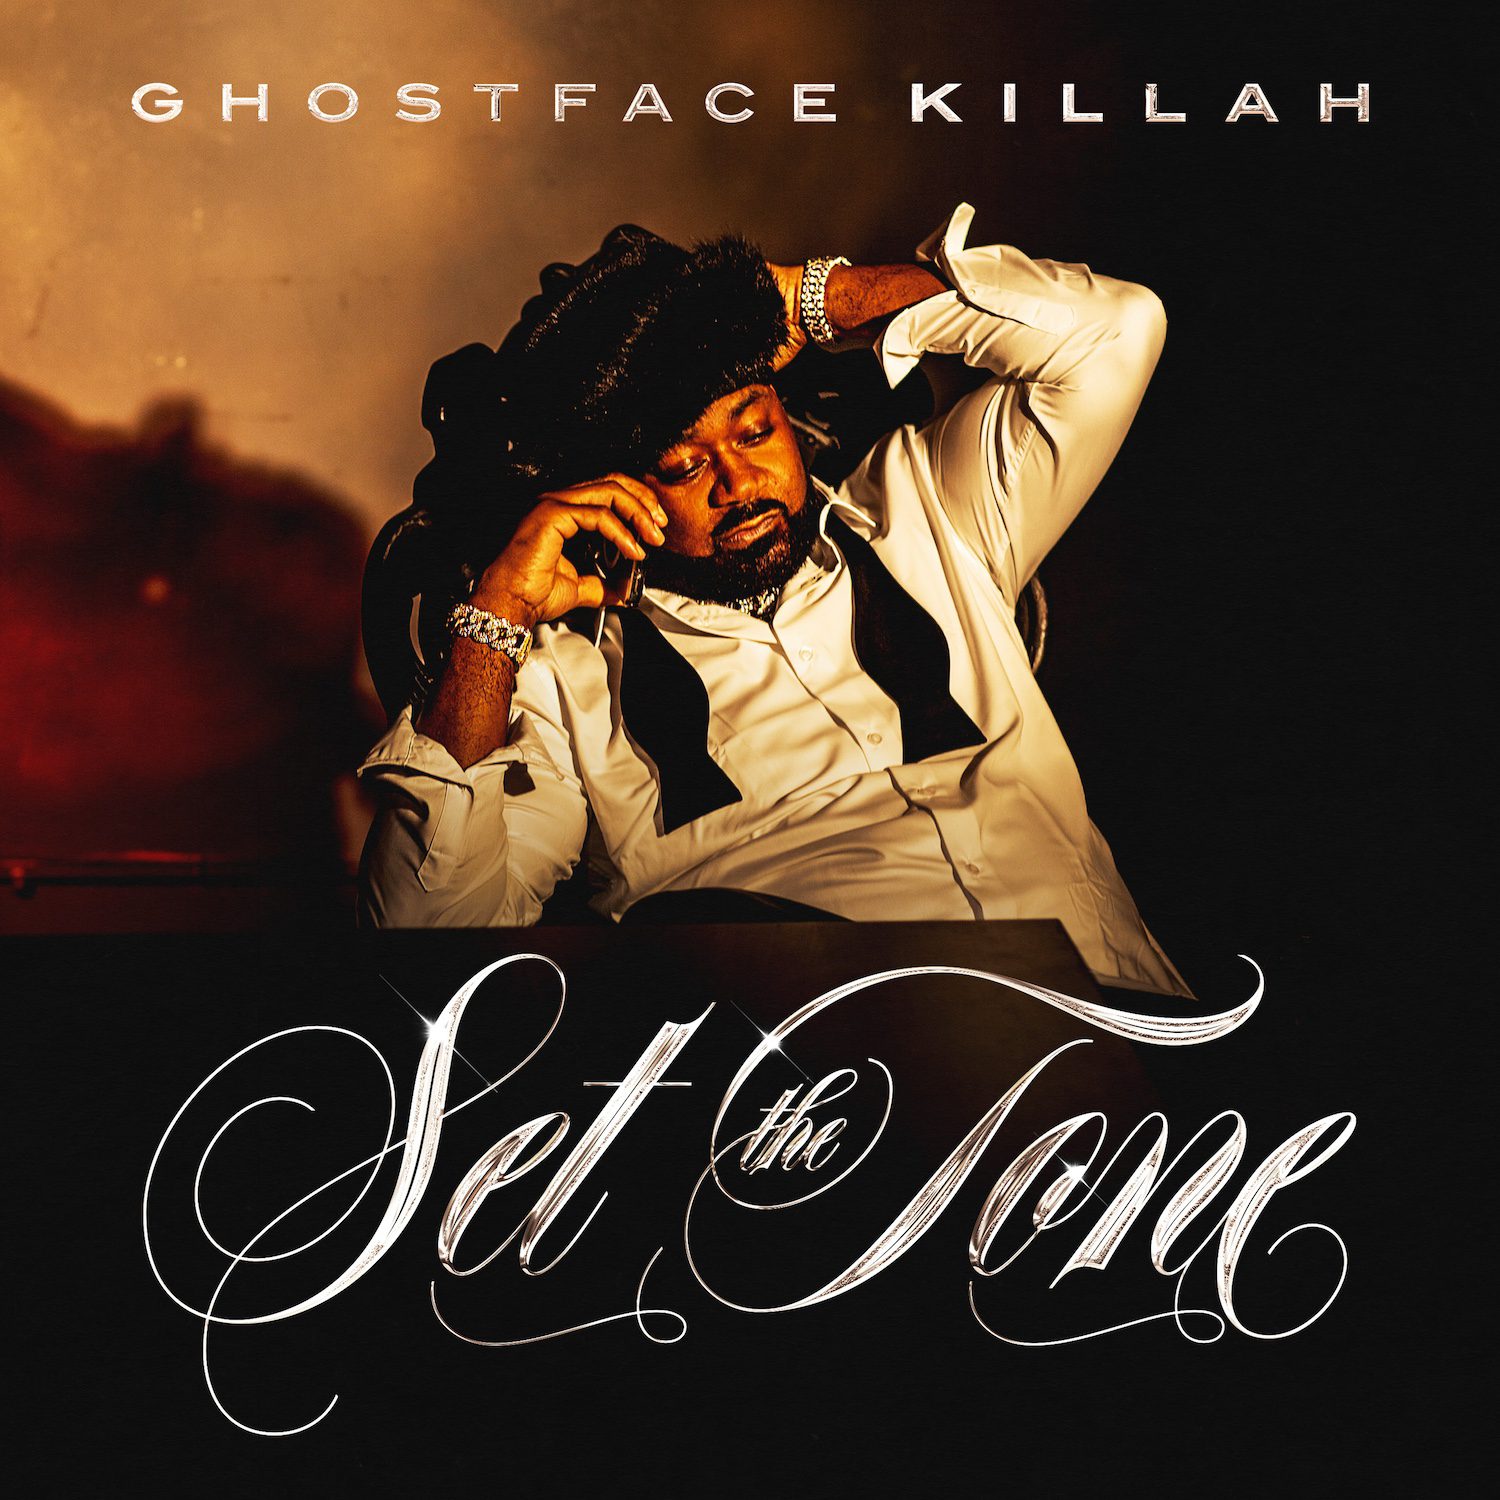 Ghostface Killah Gives a Star-Studded Mass Appeal Records Debut in 